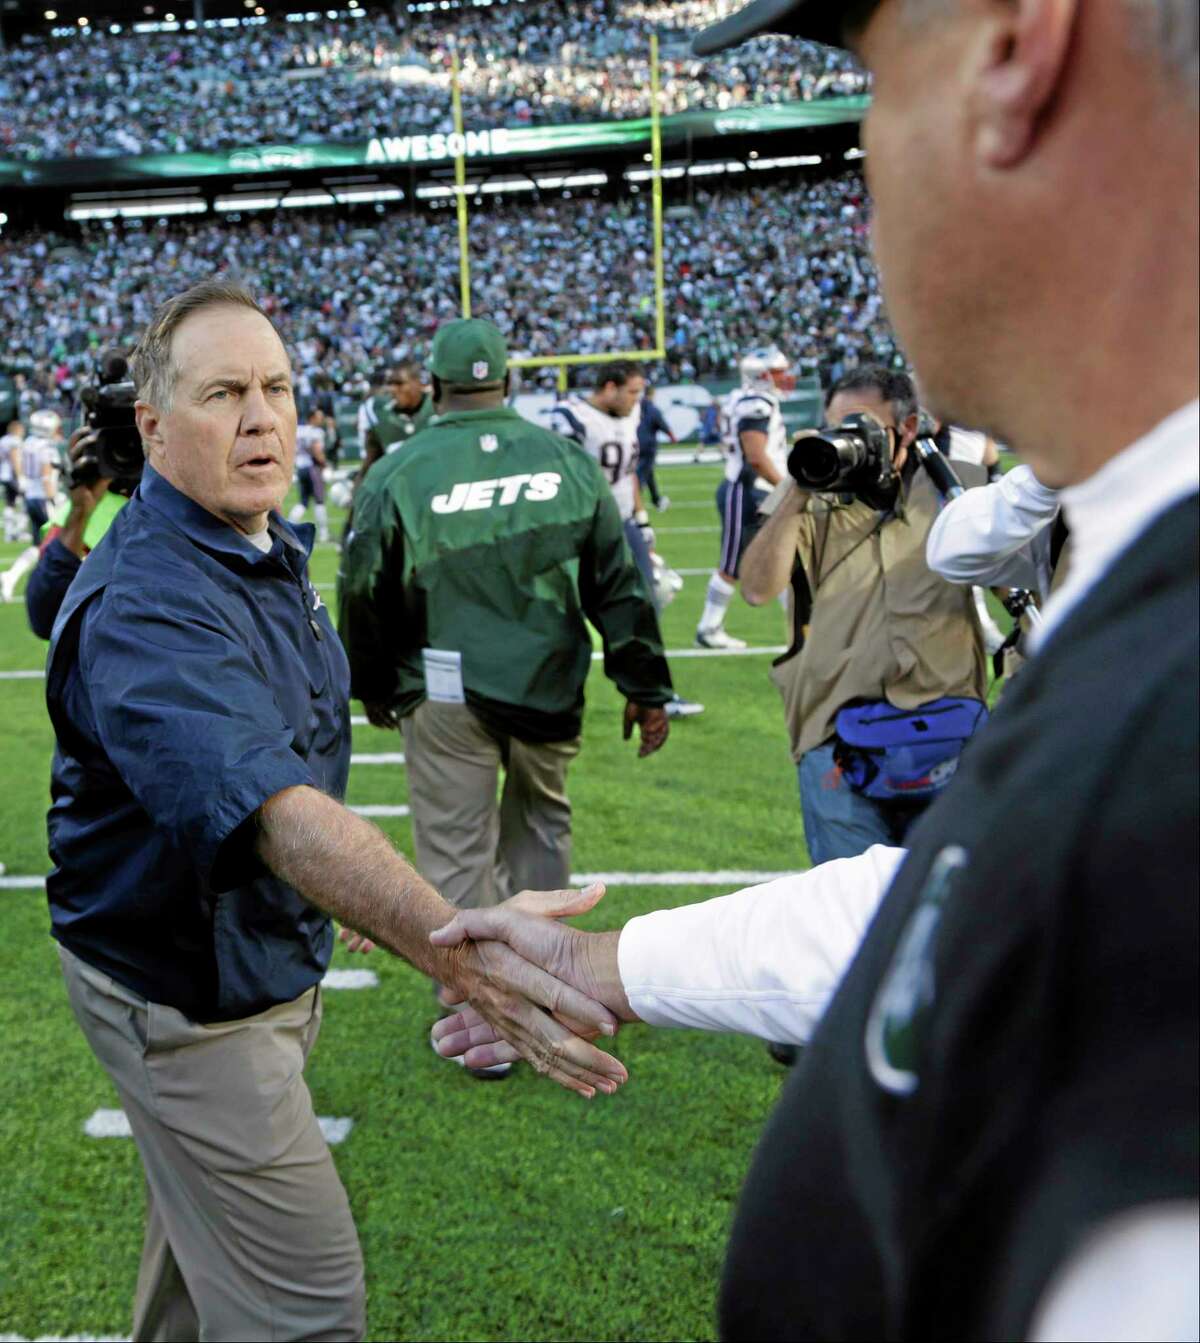 New England Patriots head coach Bill Belichick shakes hands with New York Jets head coach Rex Ryan after Sunday’s game in East Rutherford, N.J. The Jets won the game 30-27.